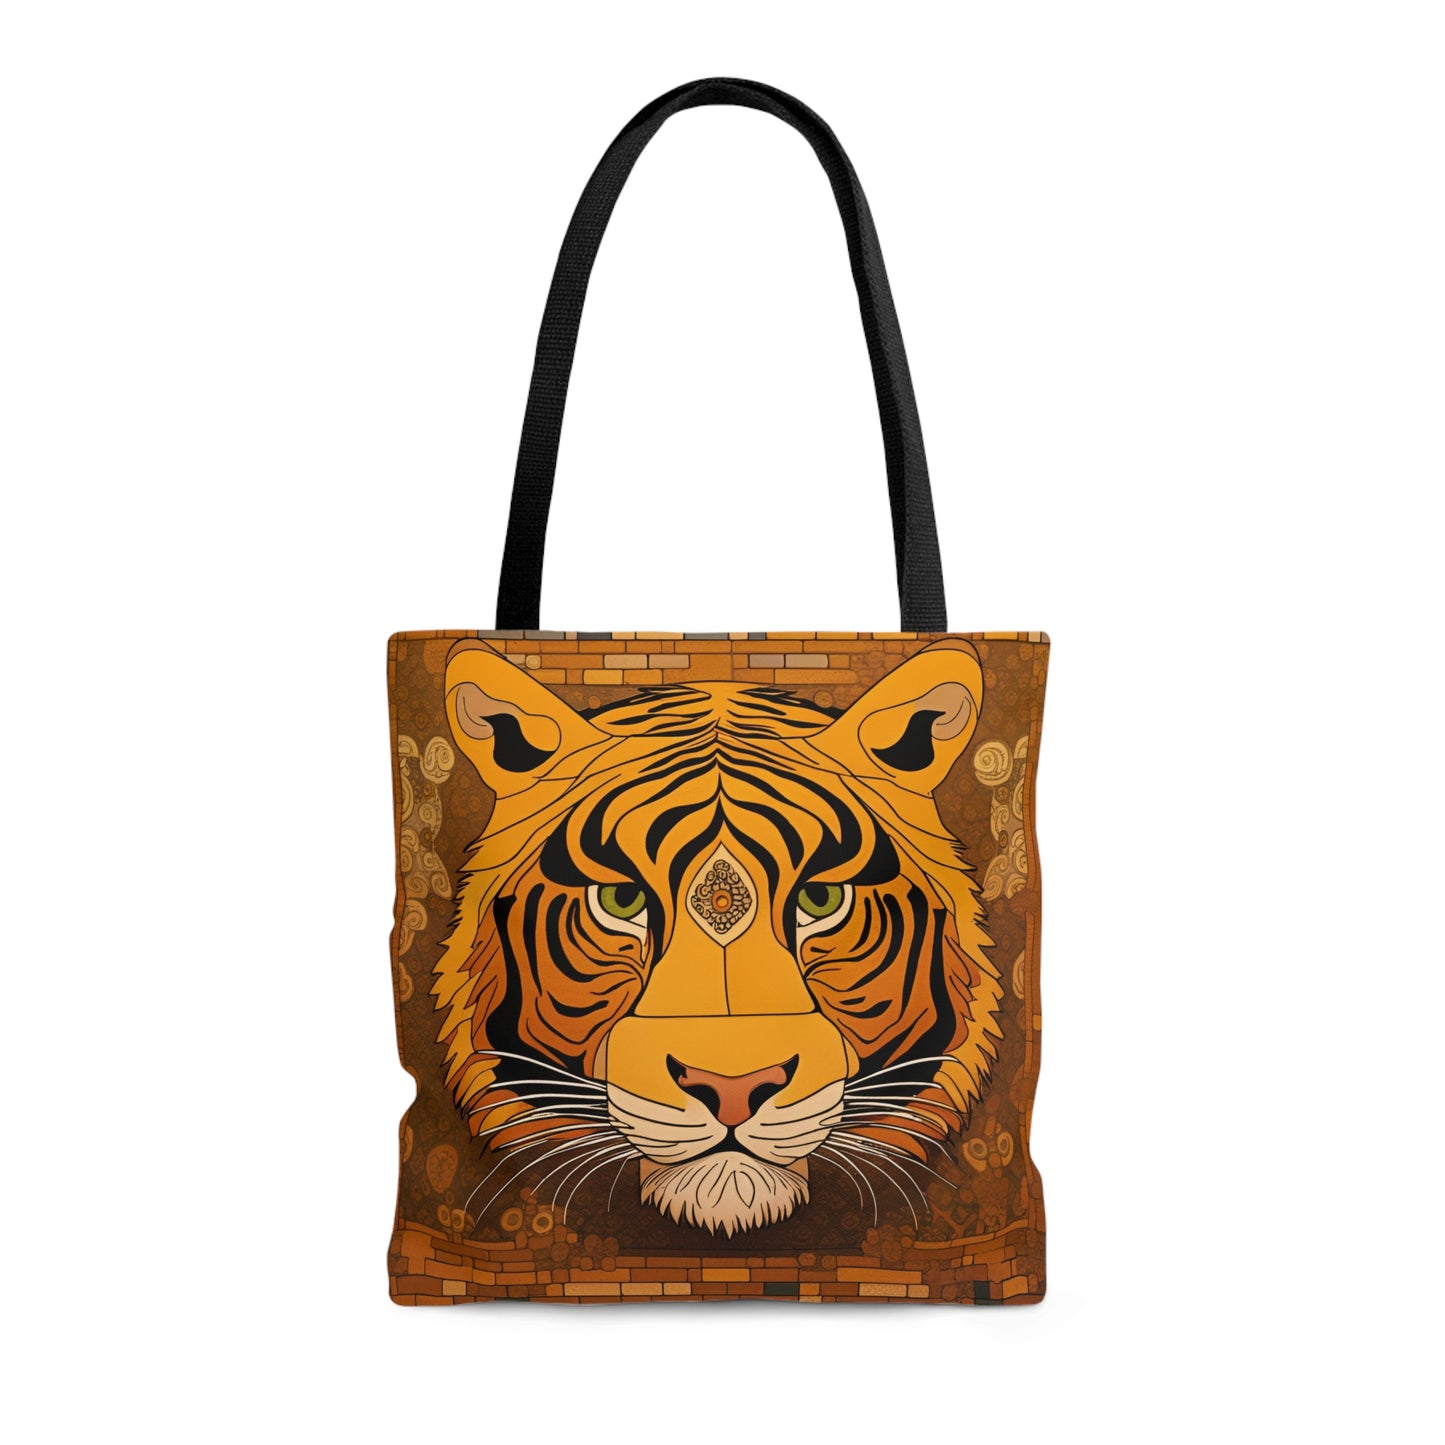 Tiger Head in the Style of Gustav Klimt Printed on Tote Bag front